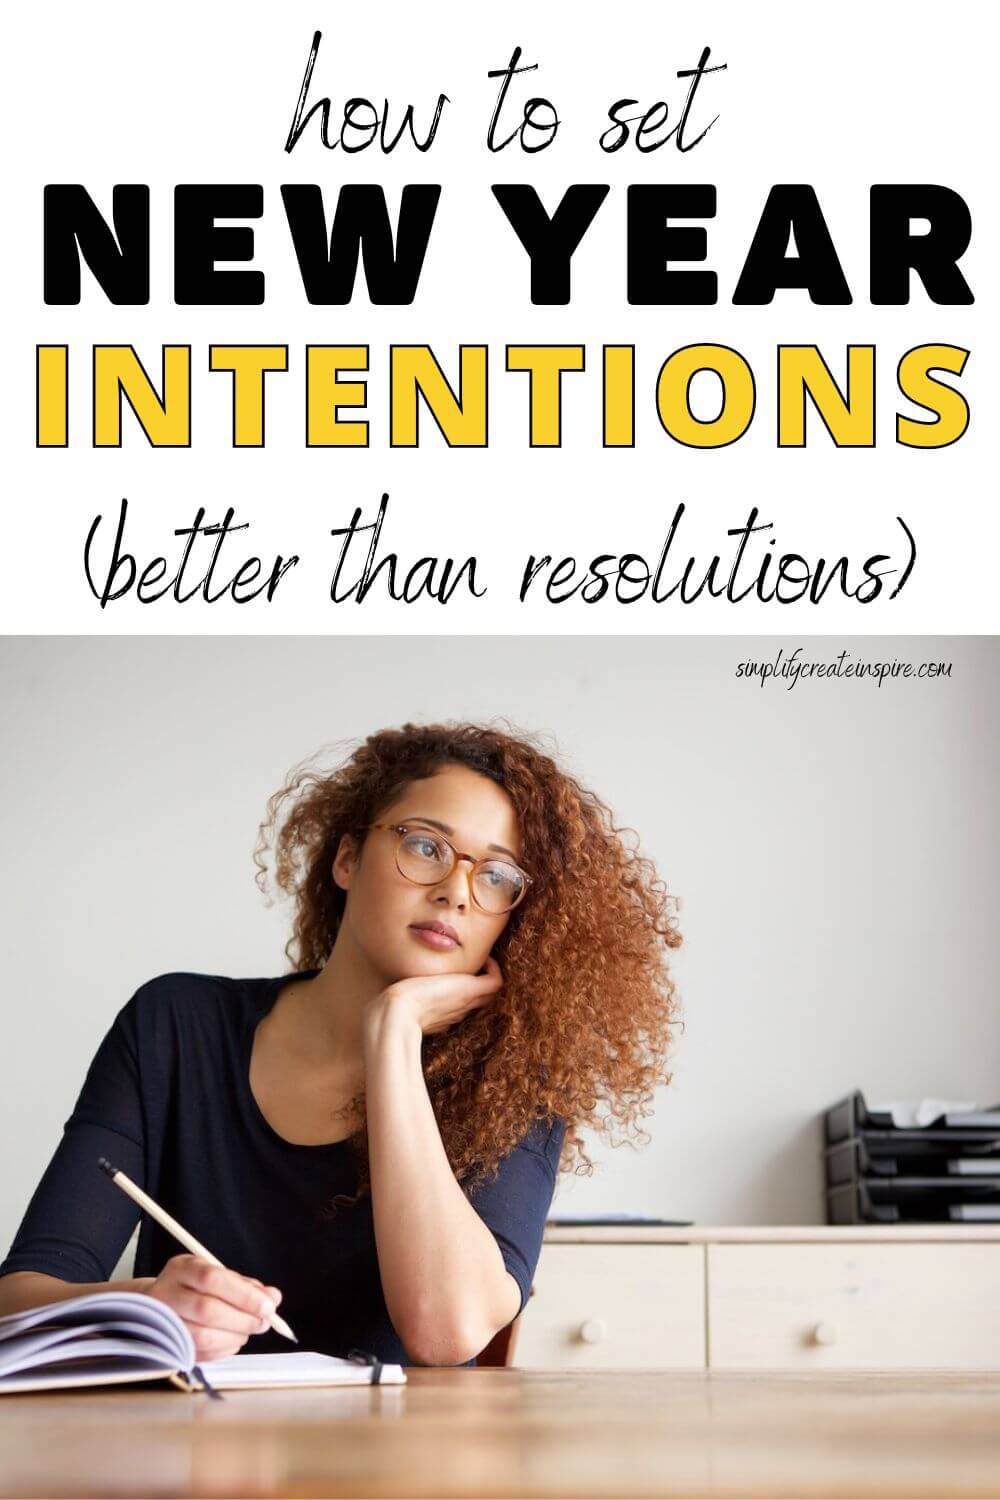 How to set new year intentions better than resolutions.